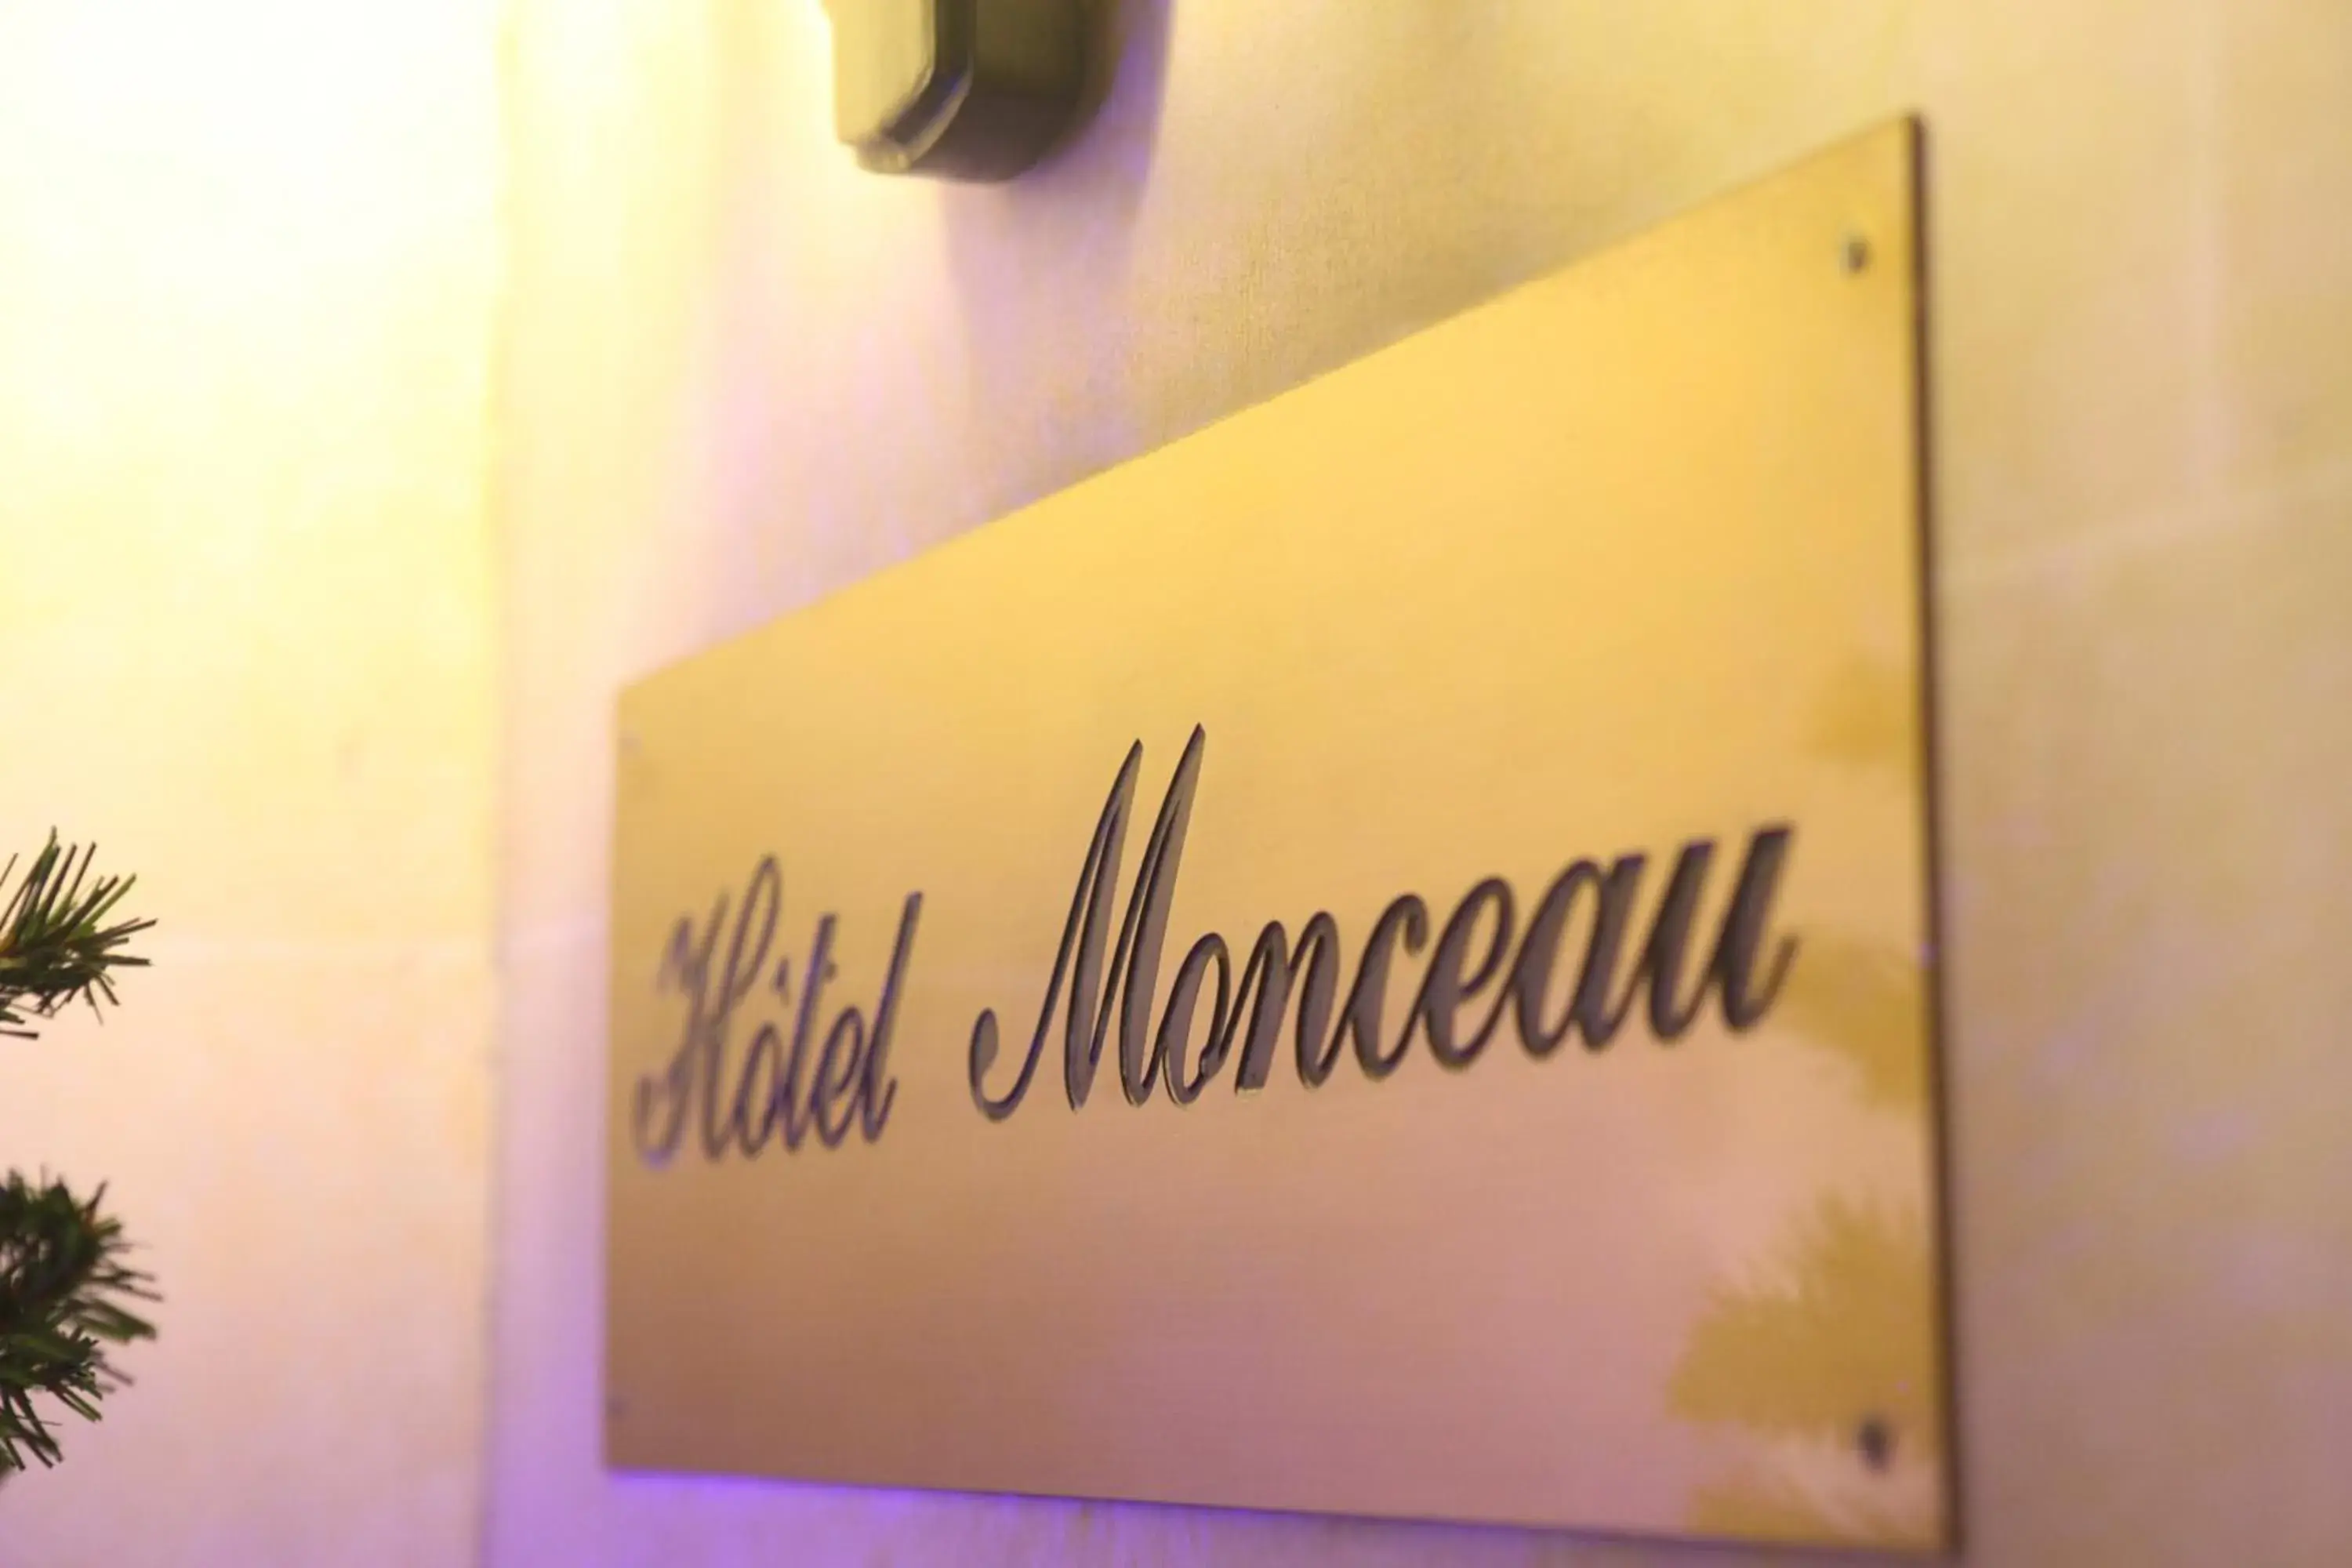 Decorative detail in Hotel Monceau Wagram